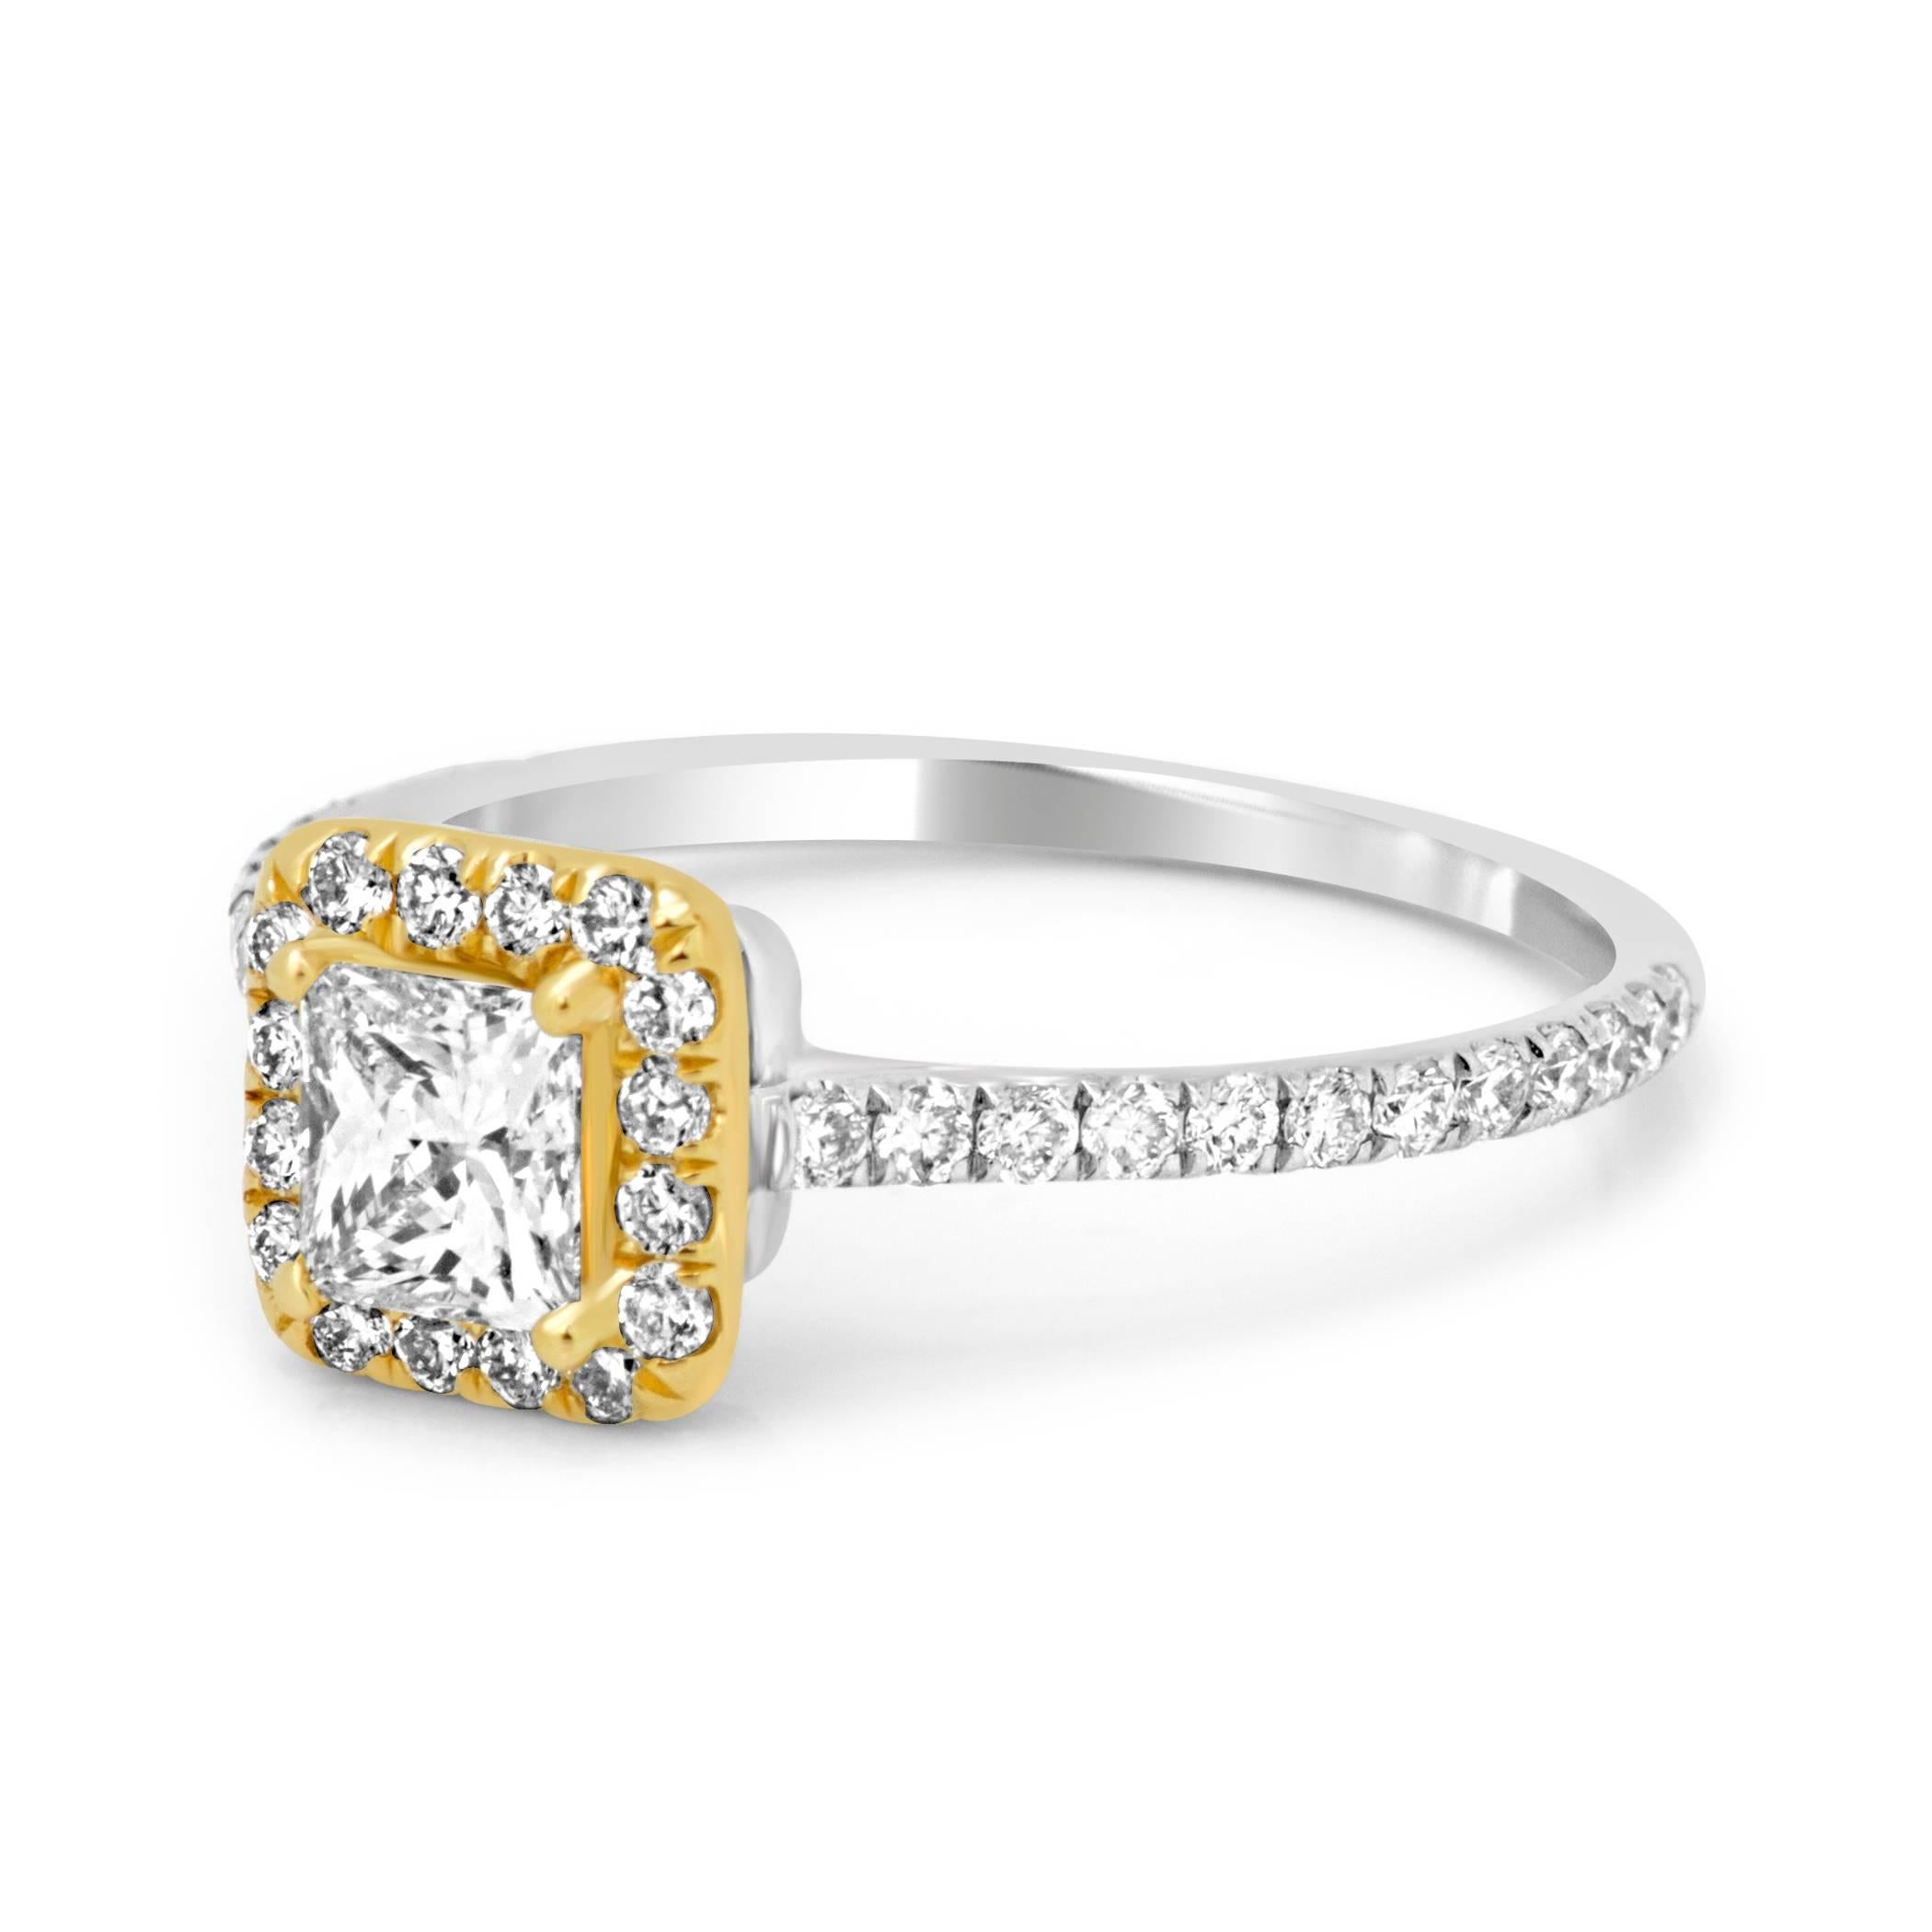 0.45 Carat Princess Cut Diamond G-H Color VS Clarity encircled in a single Halo of White Round G-H Color VS-SI Clarity Diamonds 0.36 Carat in a Chic and Delicate Handmade Classic 18K White and Yellow Gold Ring.

MADE IN USA
Total Diamond Weight 0.81